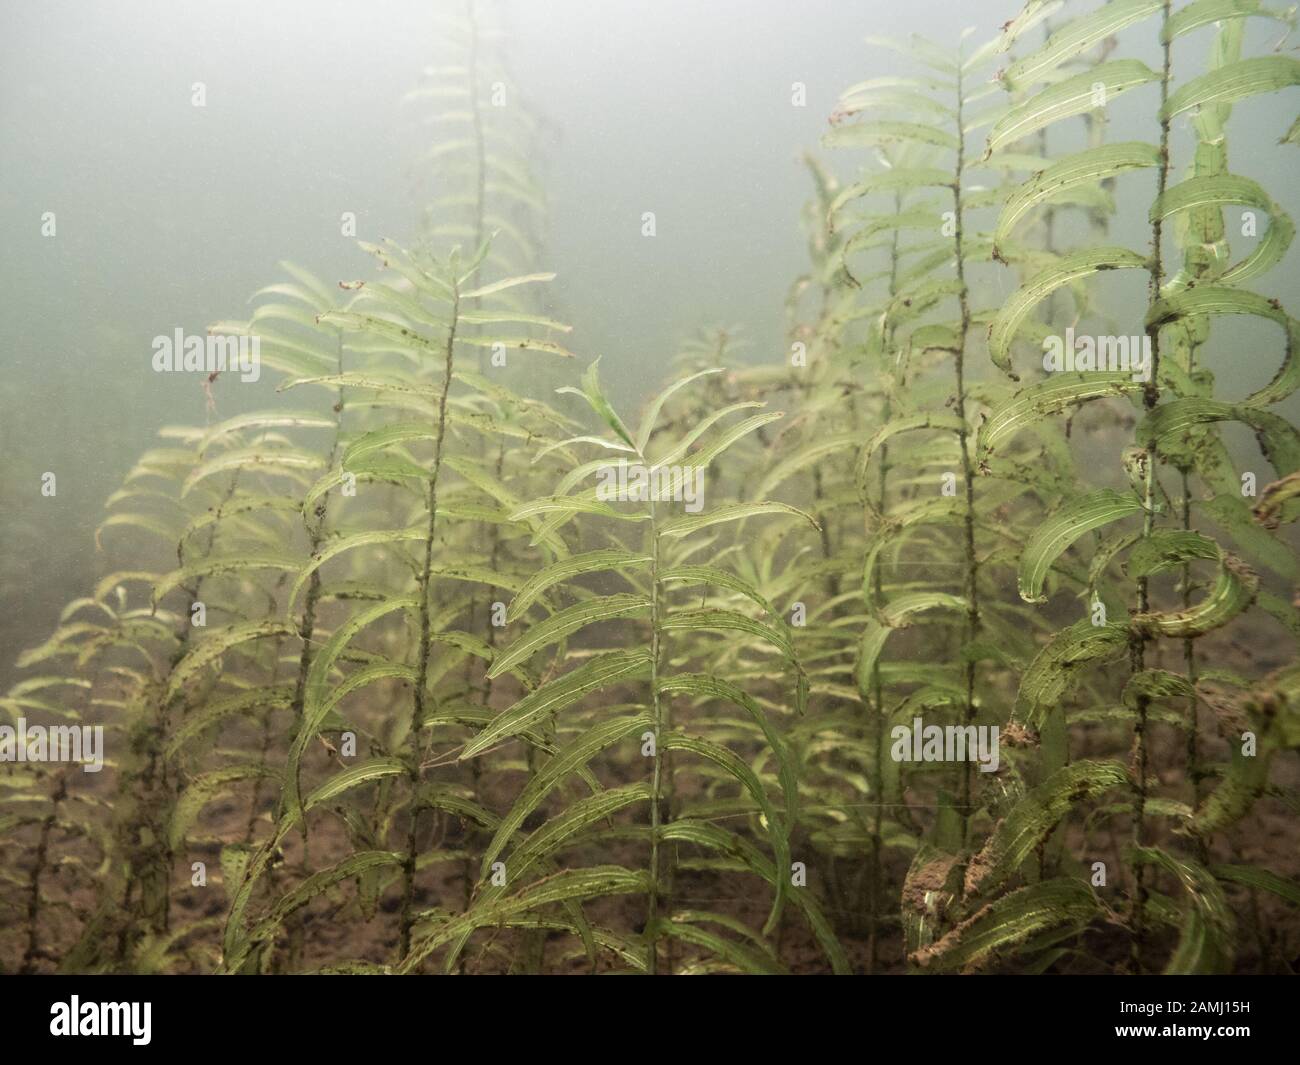 Worn out sprouts of claspingleaf pondweed in late summer. Stock Photo